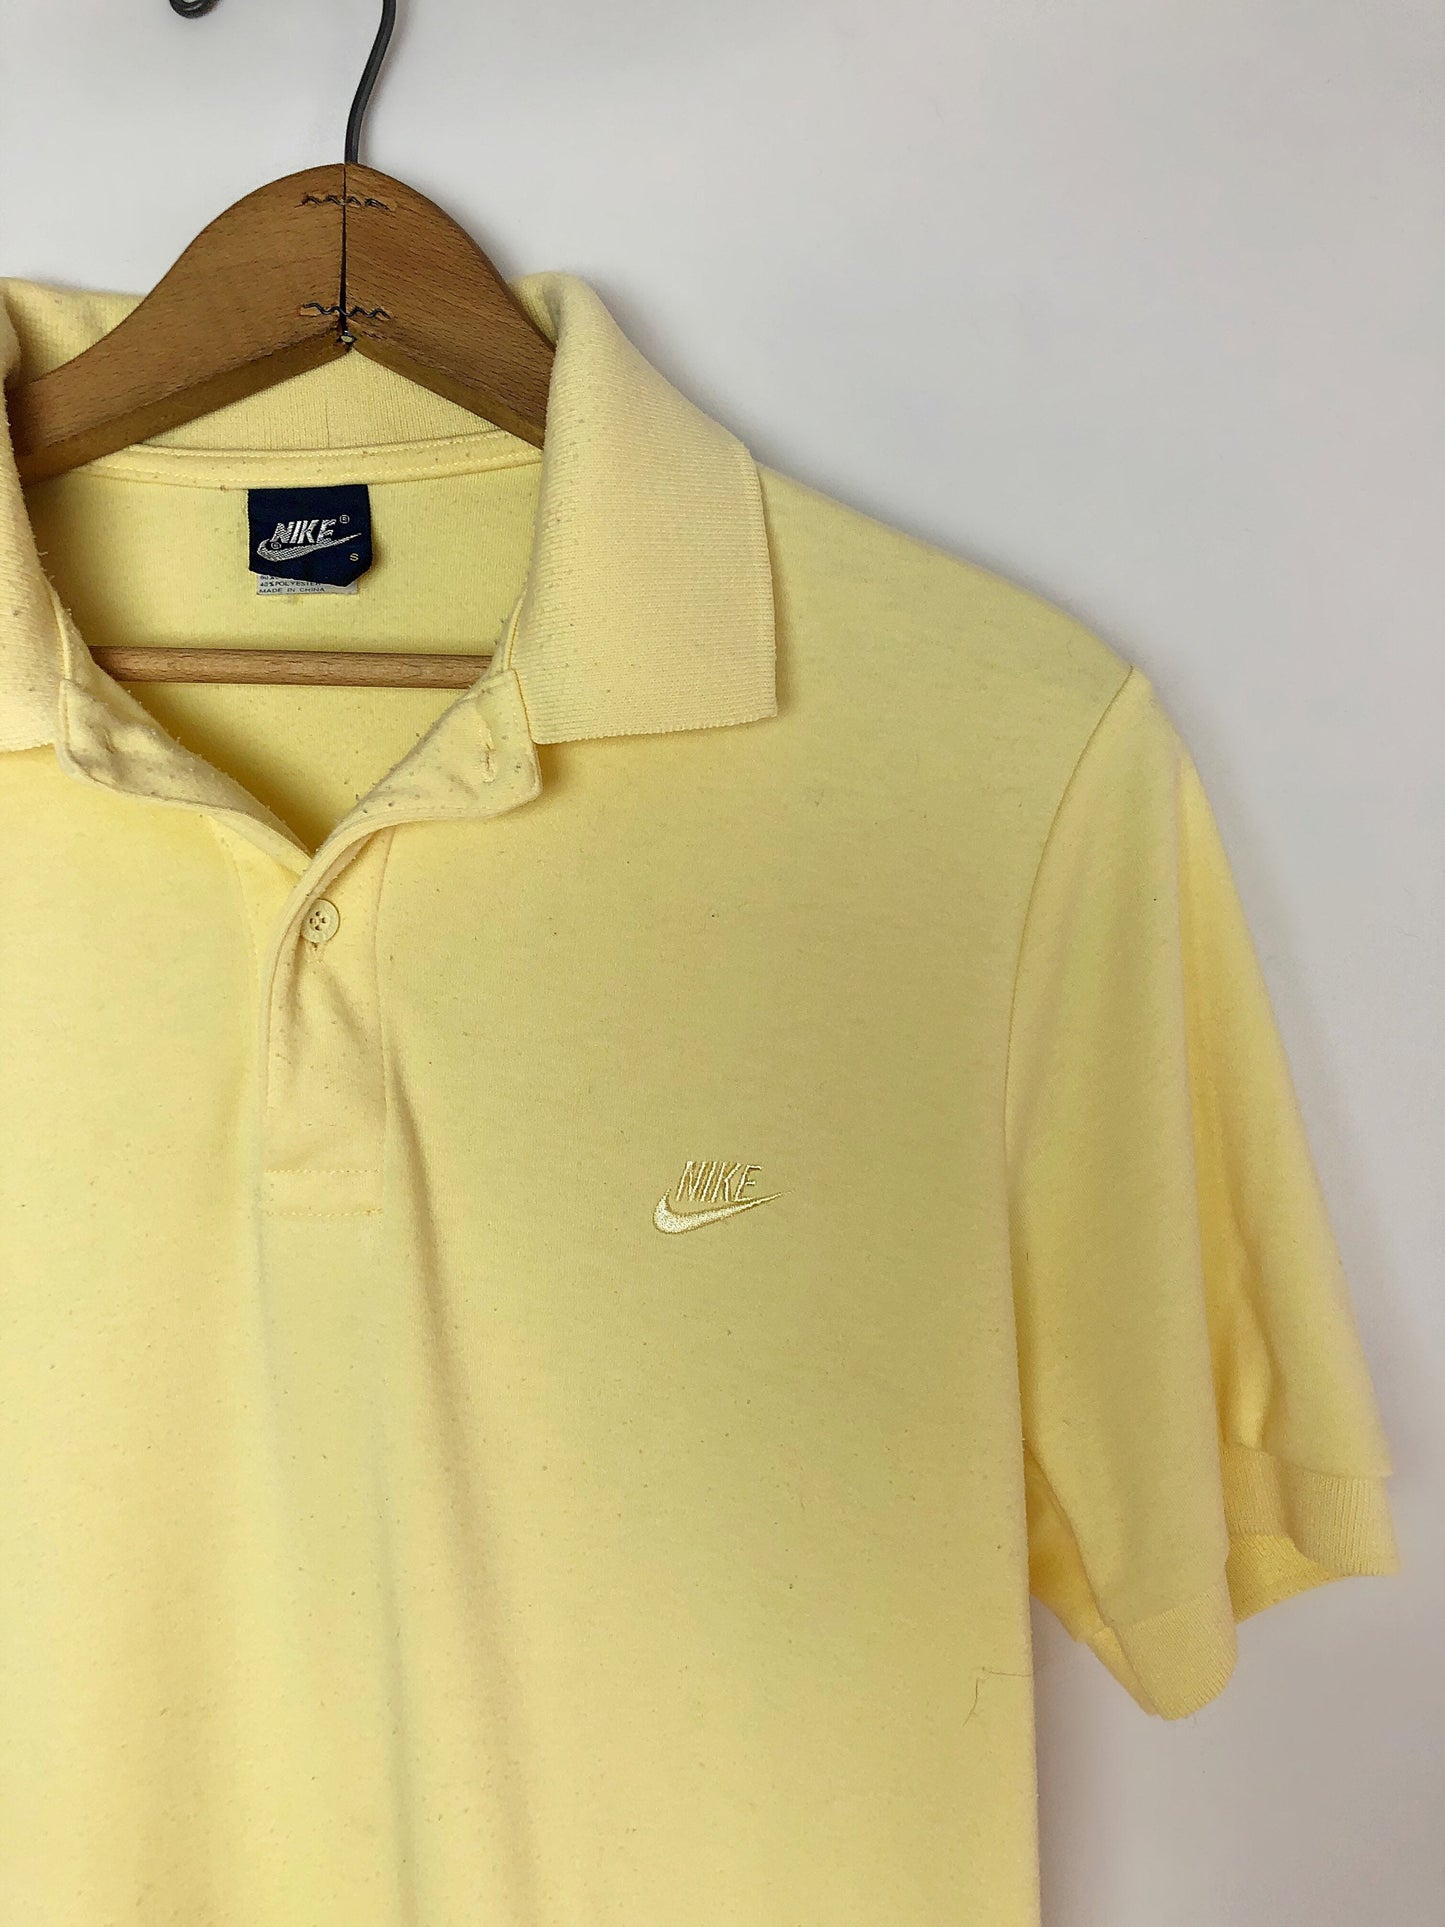 Vintage 80’s NIKE Swoosh Logo Blue Label Butter Yellow Cotton Henley Polo Size Small